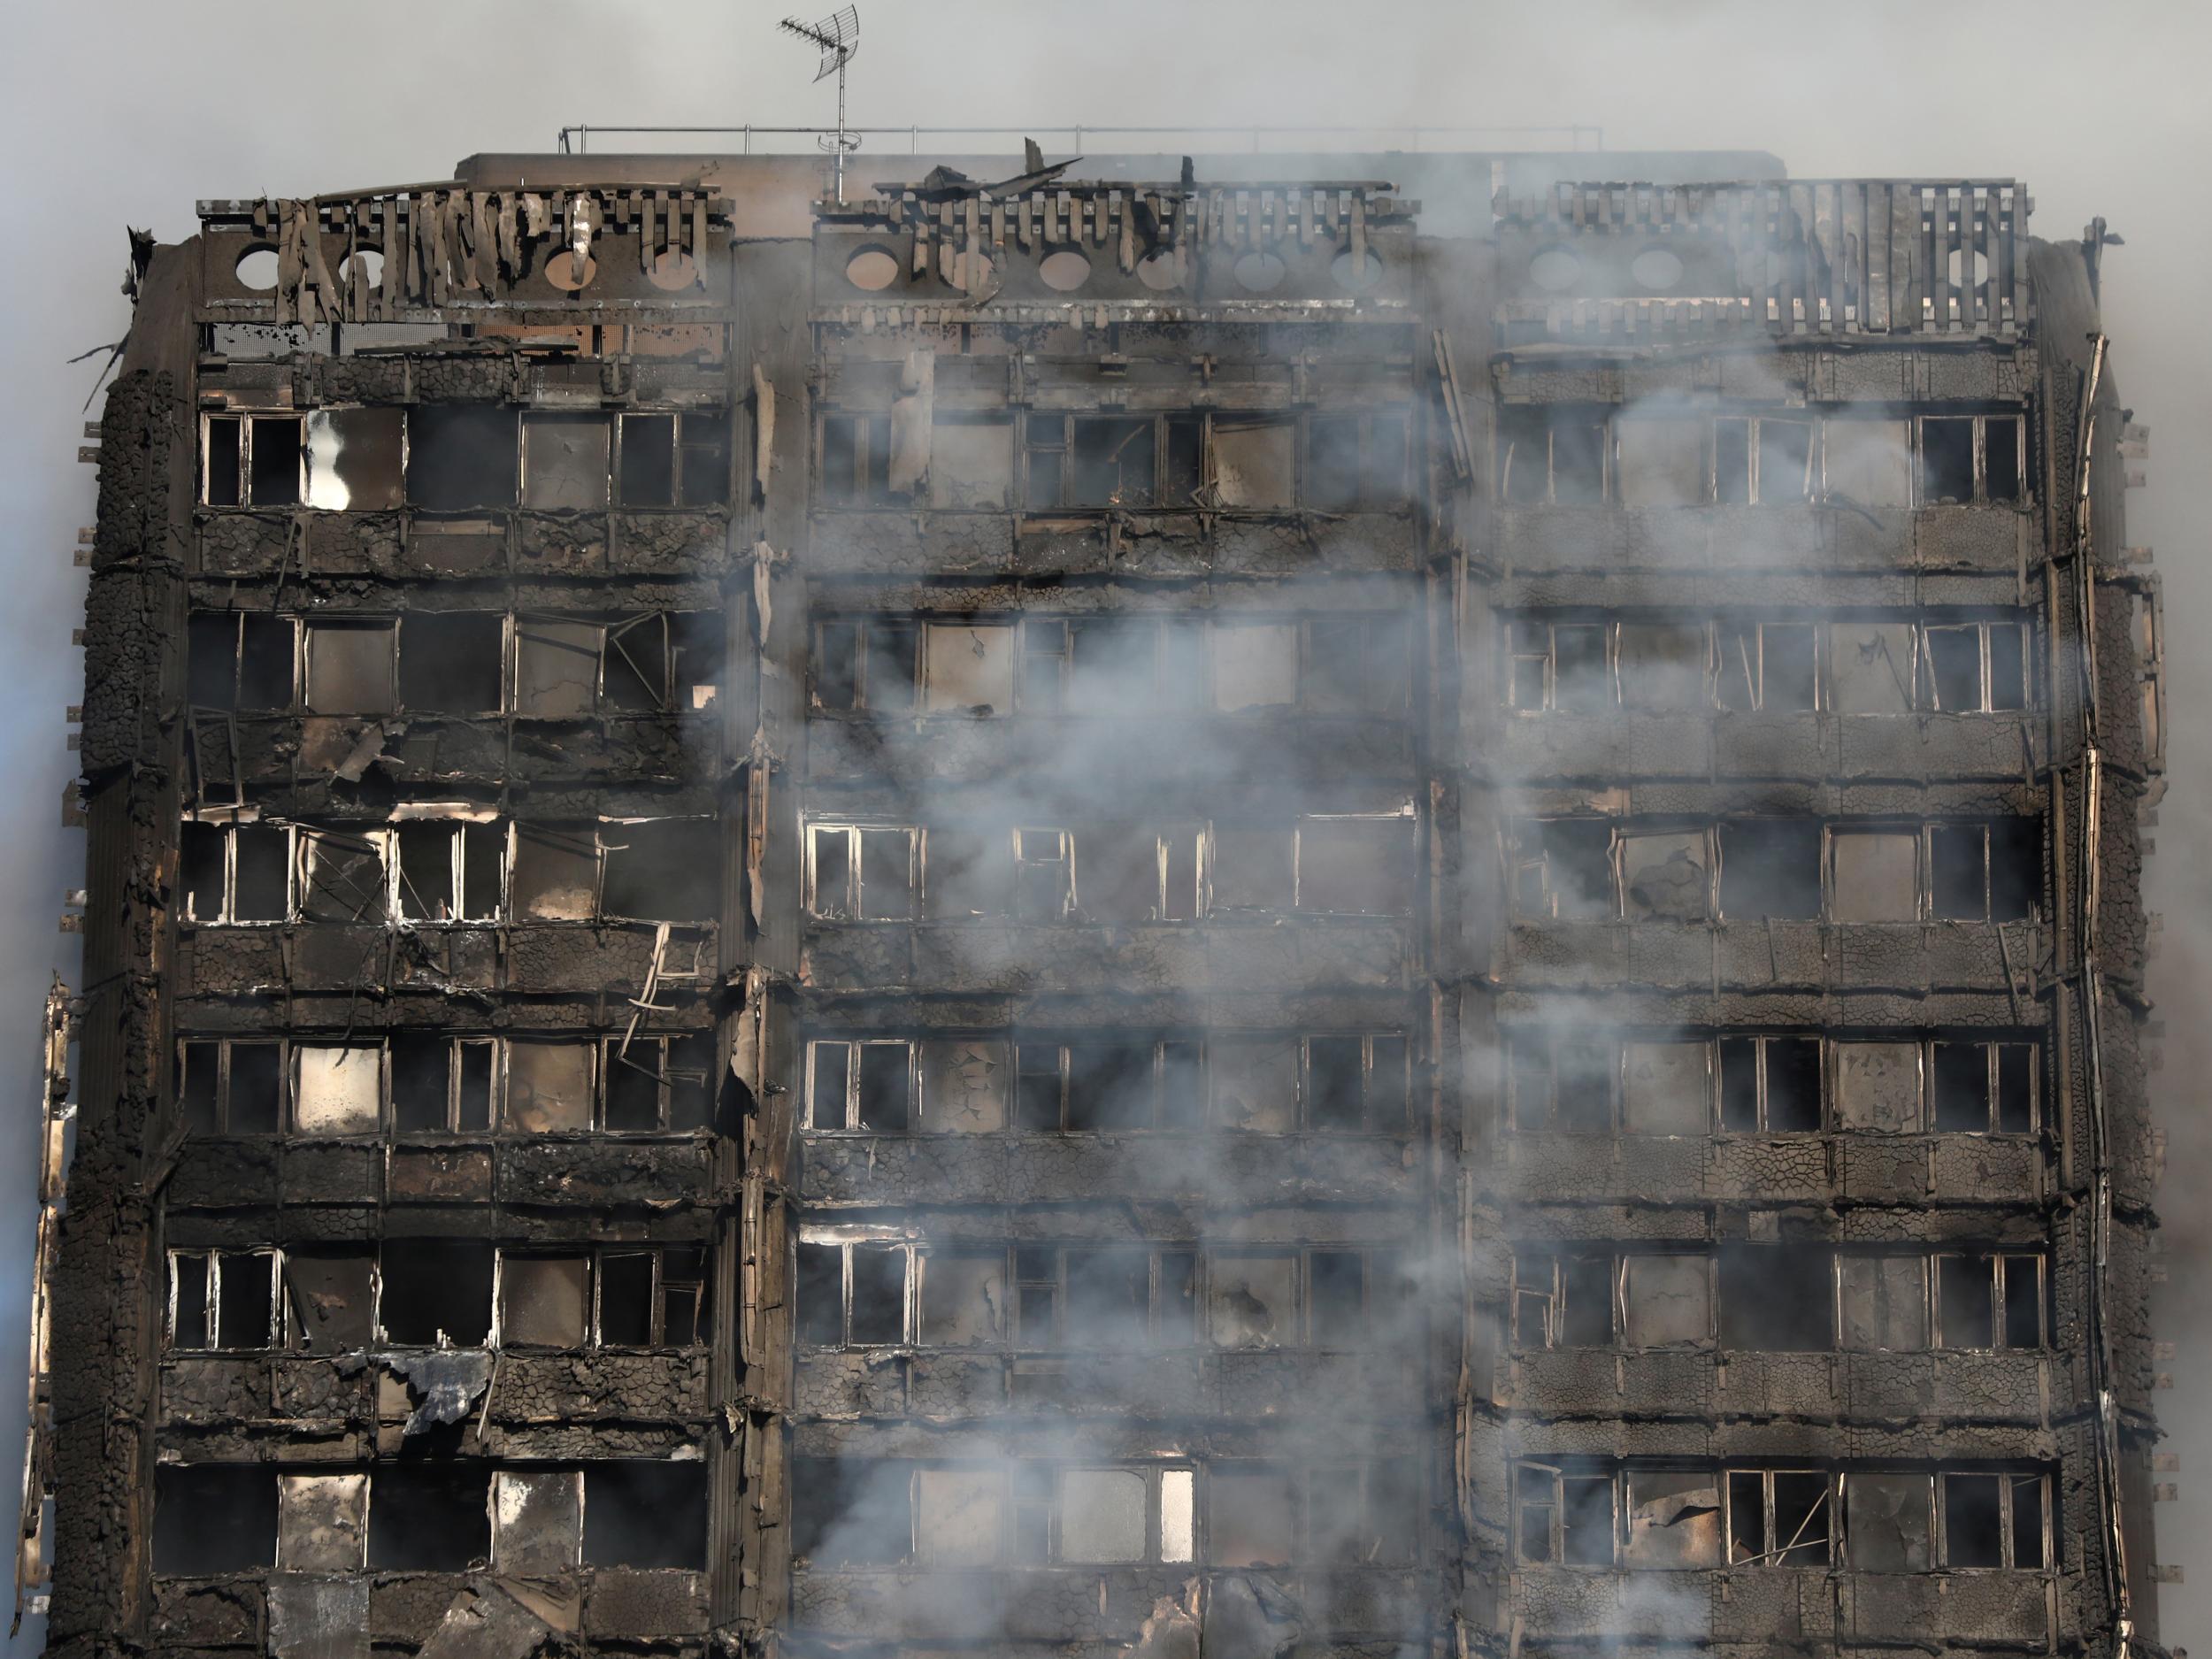 Smoke billows from a tower block severly damaged by a serious fire, in north Kensington, West London 14th June Reuters